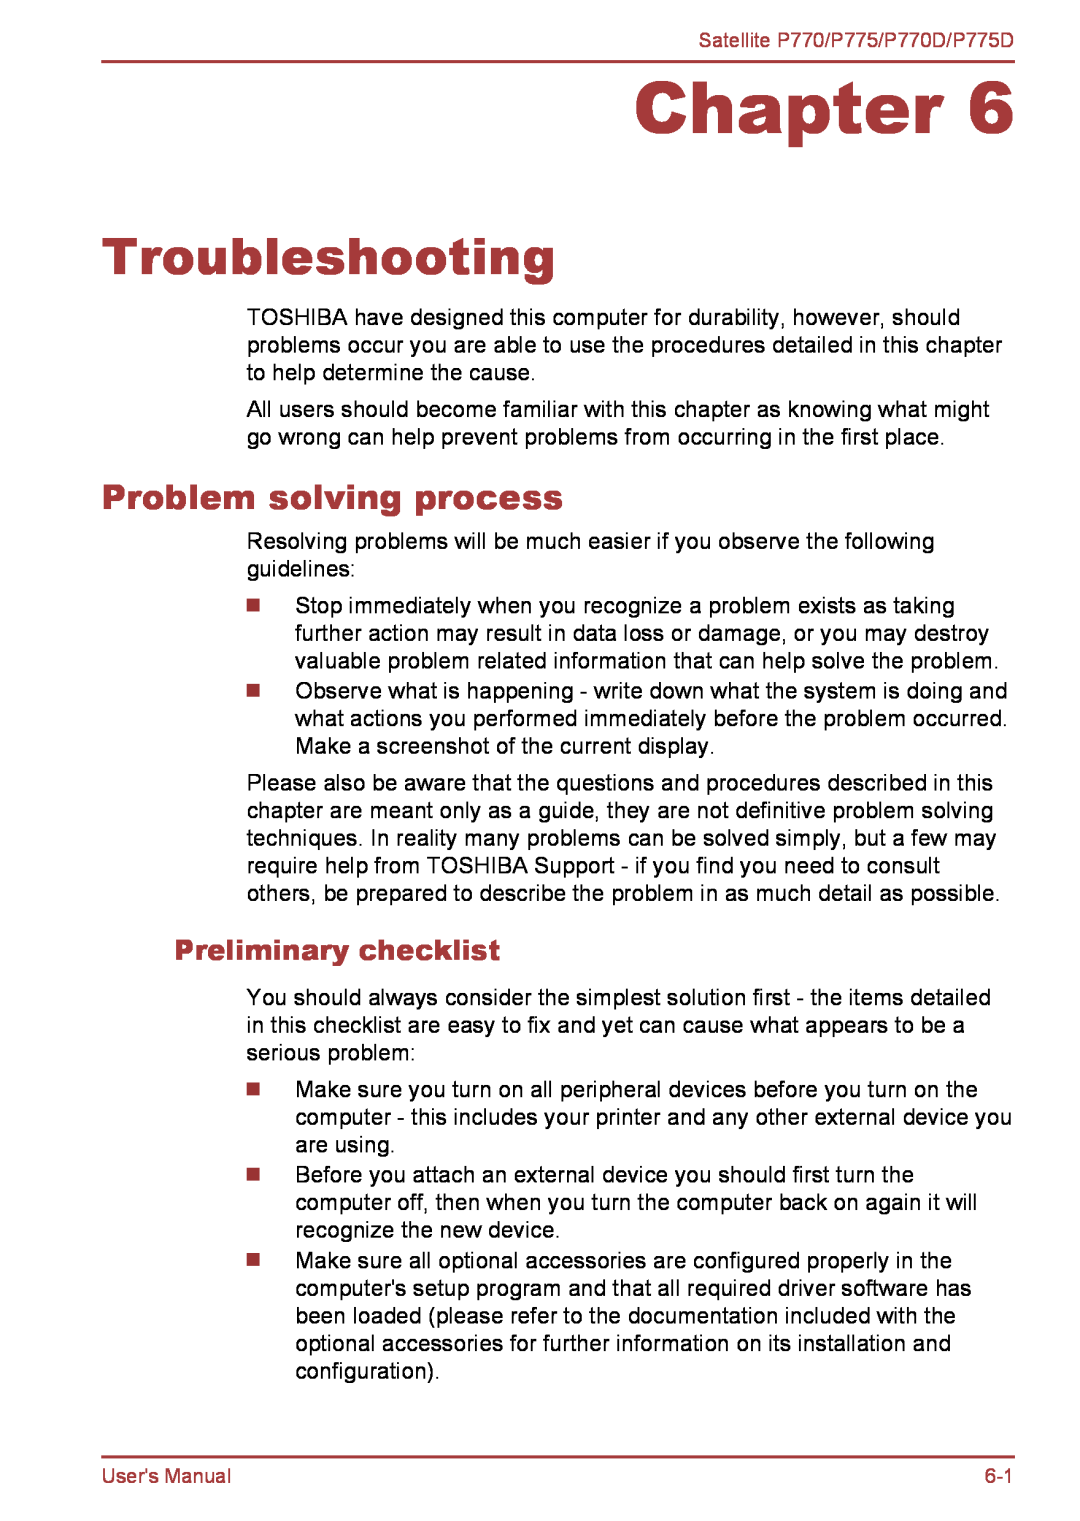 Toshiba P770 user manual Troubleshooting, Problem solving process, Preliminary checklist, Chapter 